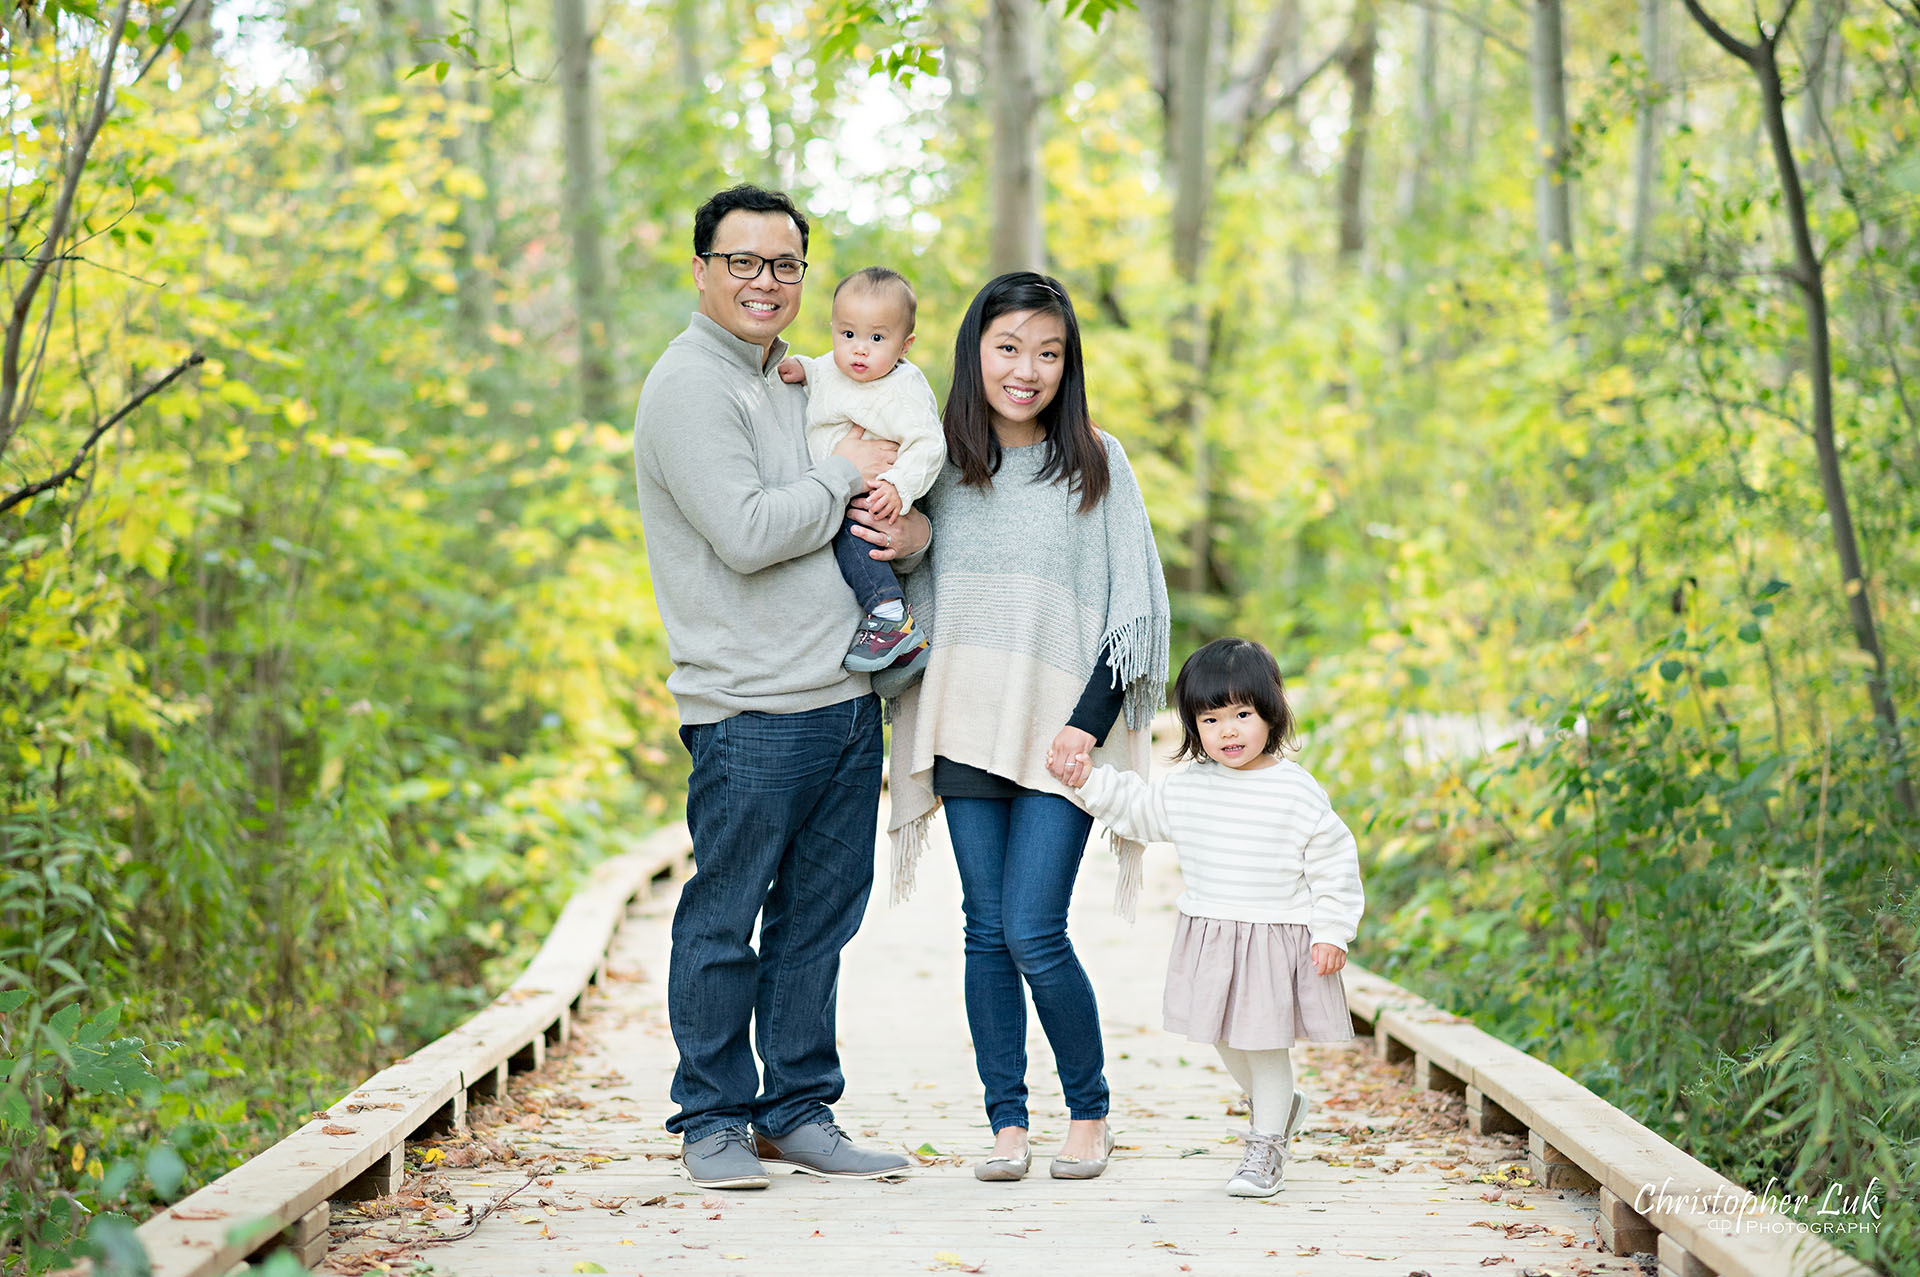 Christopher Luk Markham Family Photographer Autumn Leaves Fall Season Candid Photojournalistic Natural Bright Timeless Mother Father Son Daughter Smiling Landscape